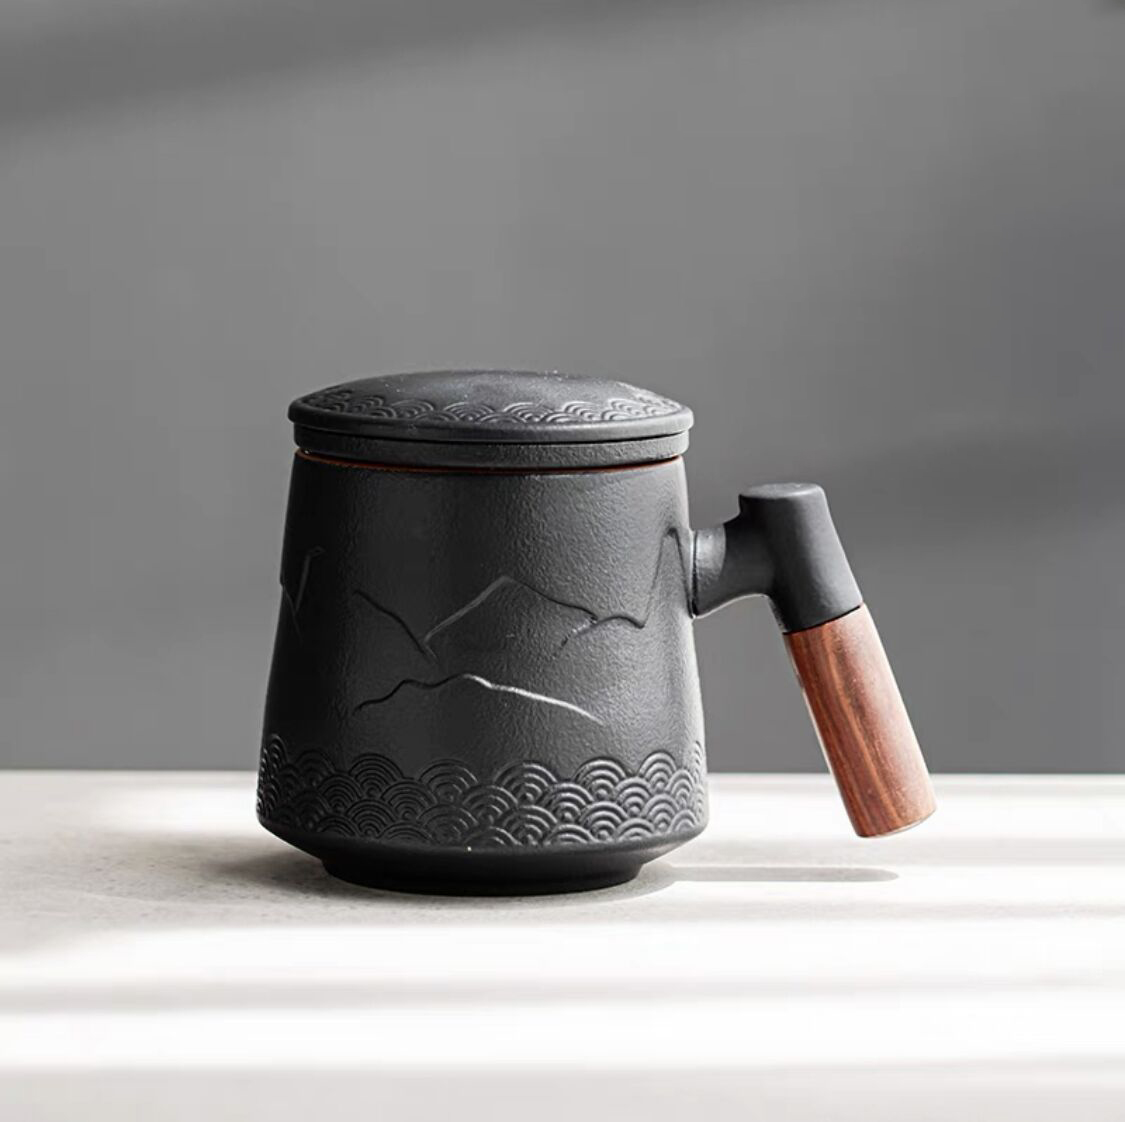 “Mountain” - Handmade Embossed Ceramic Tea Mug With Wooden Handle and Removable Infuser-TeaTsy Official Website